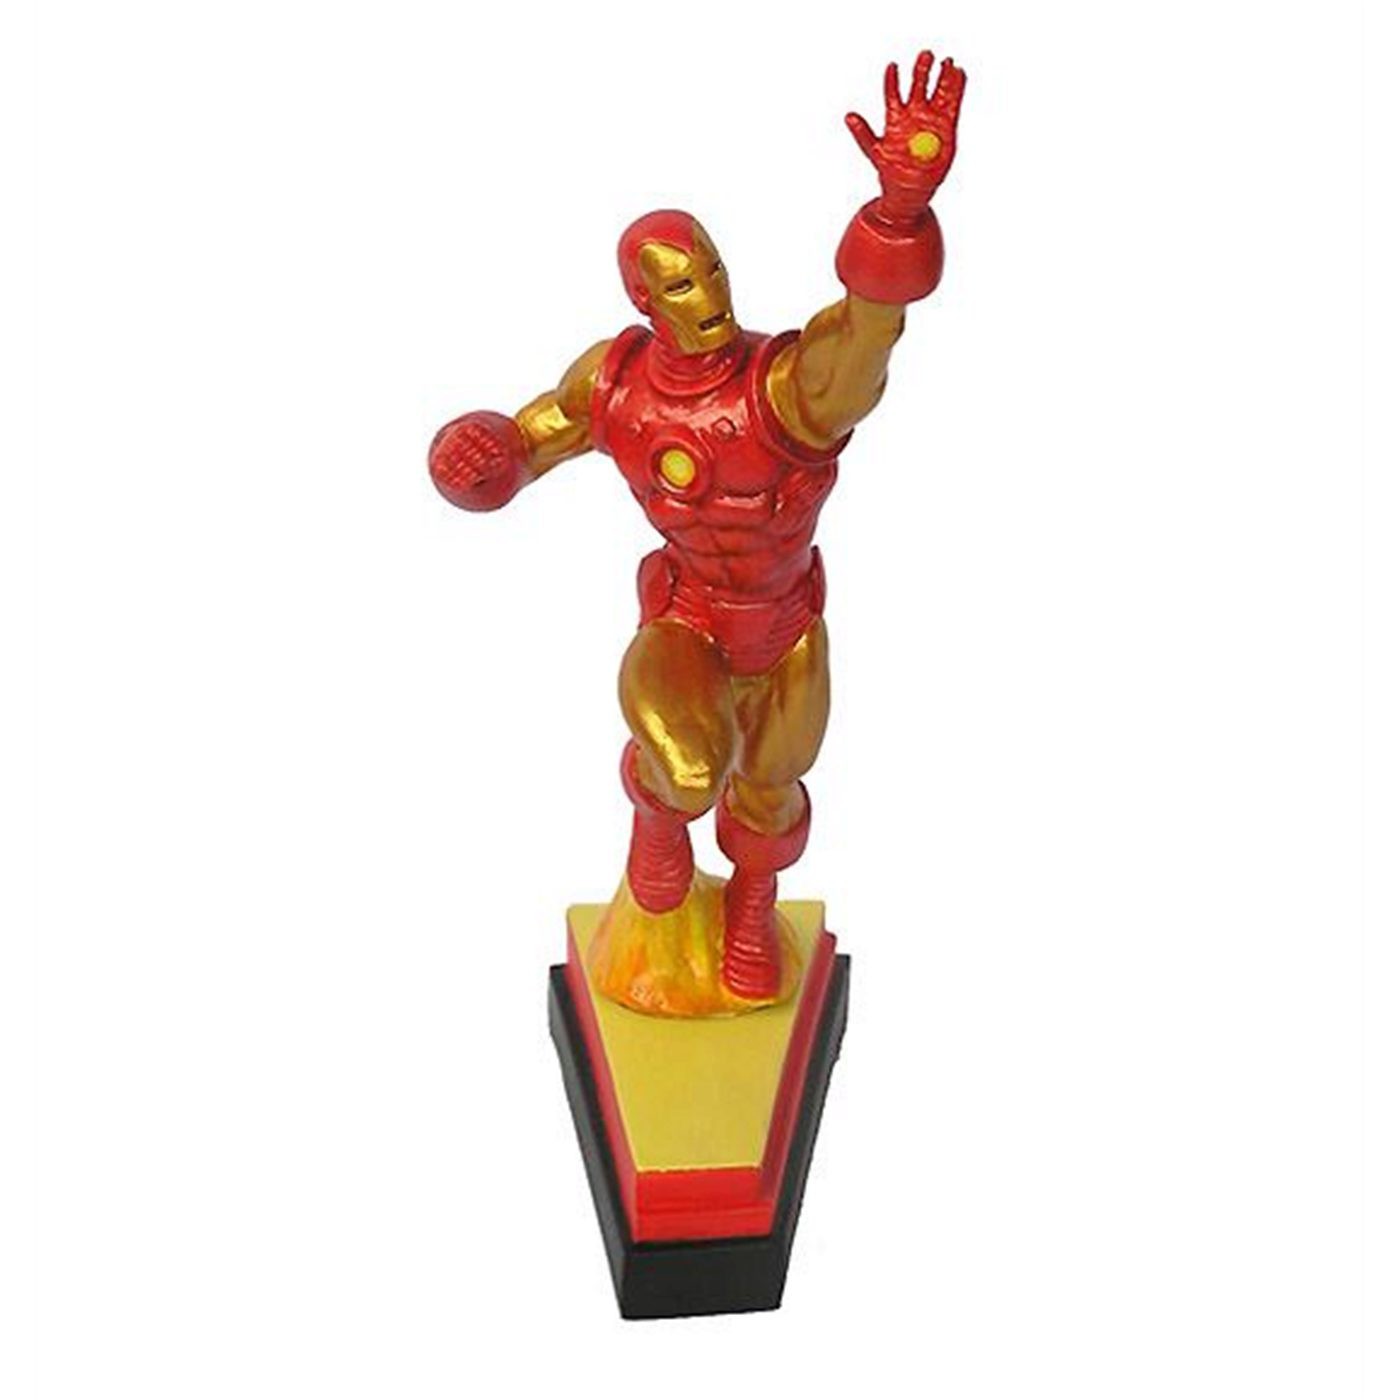 Iron Man Avengers "V" Figural Paperweight